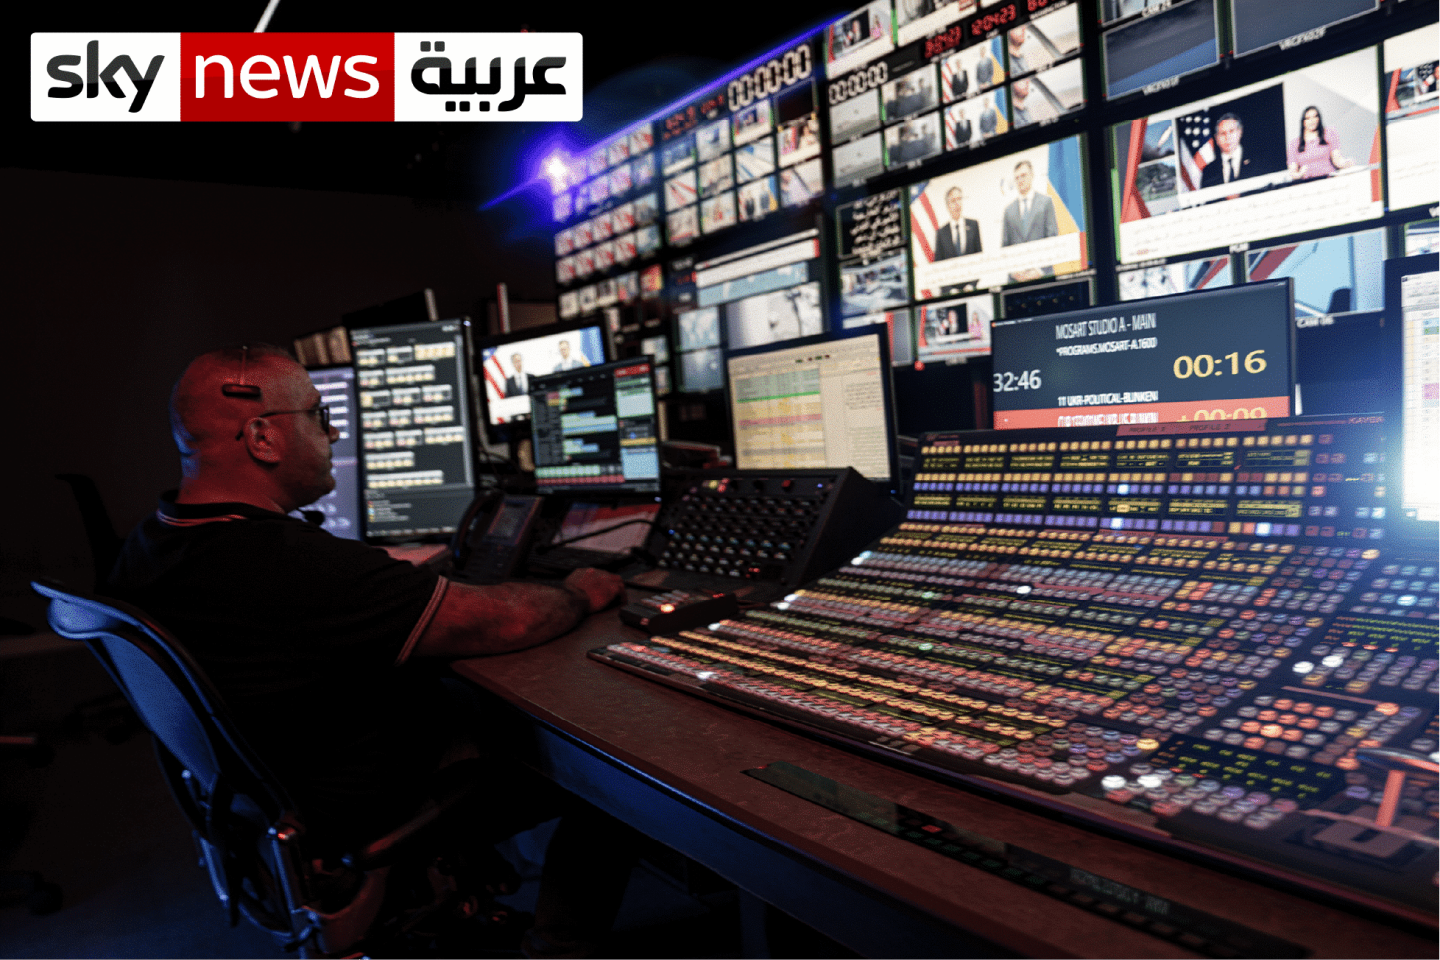 A dynamic solution, for a dynamic newsroom: Sky News Arabia sets up studio automation with Vizrt